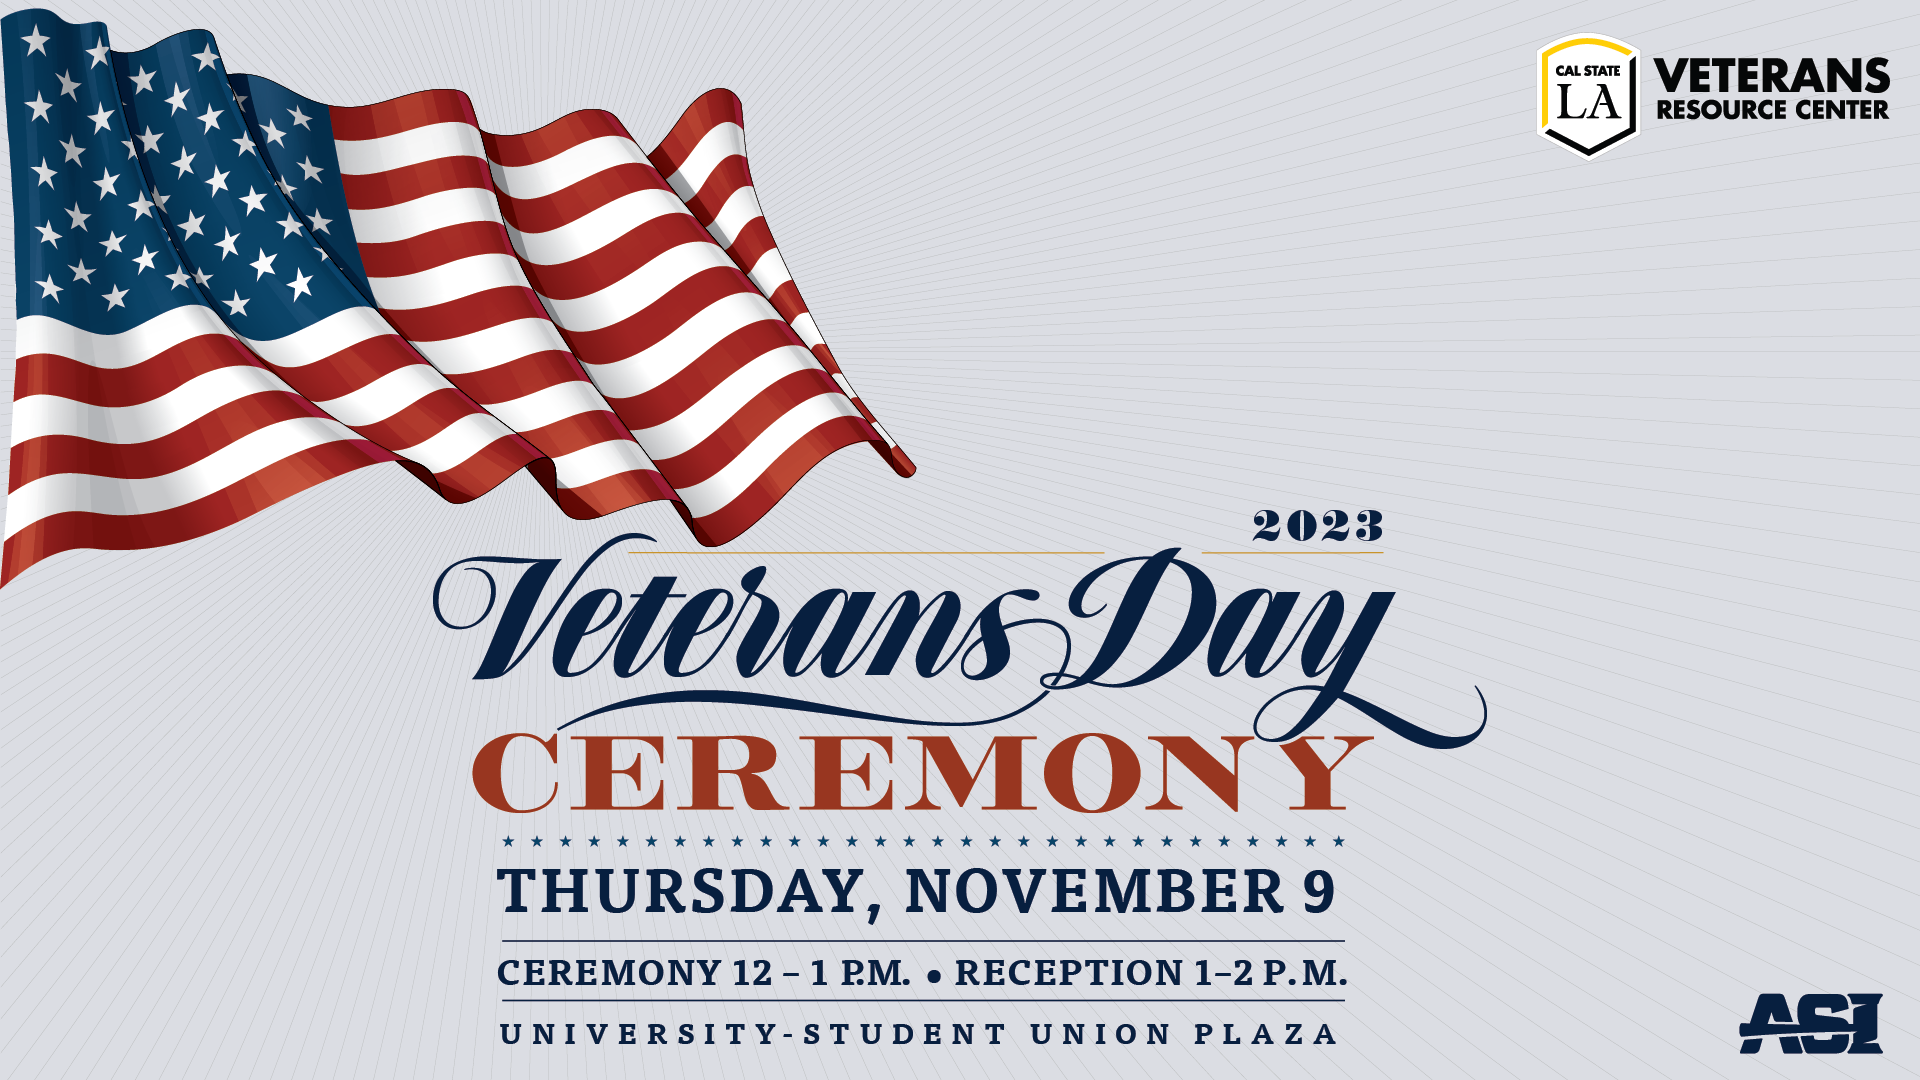 Veterans Day Ceremony image with Date November 9